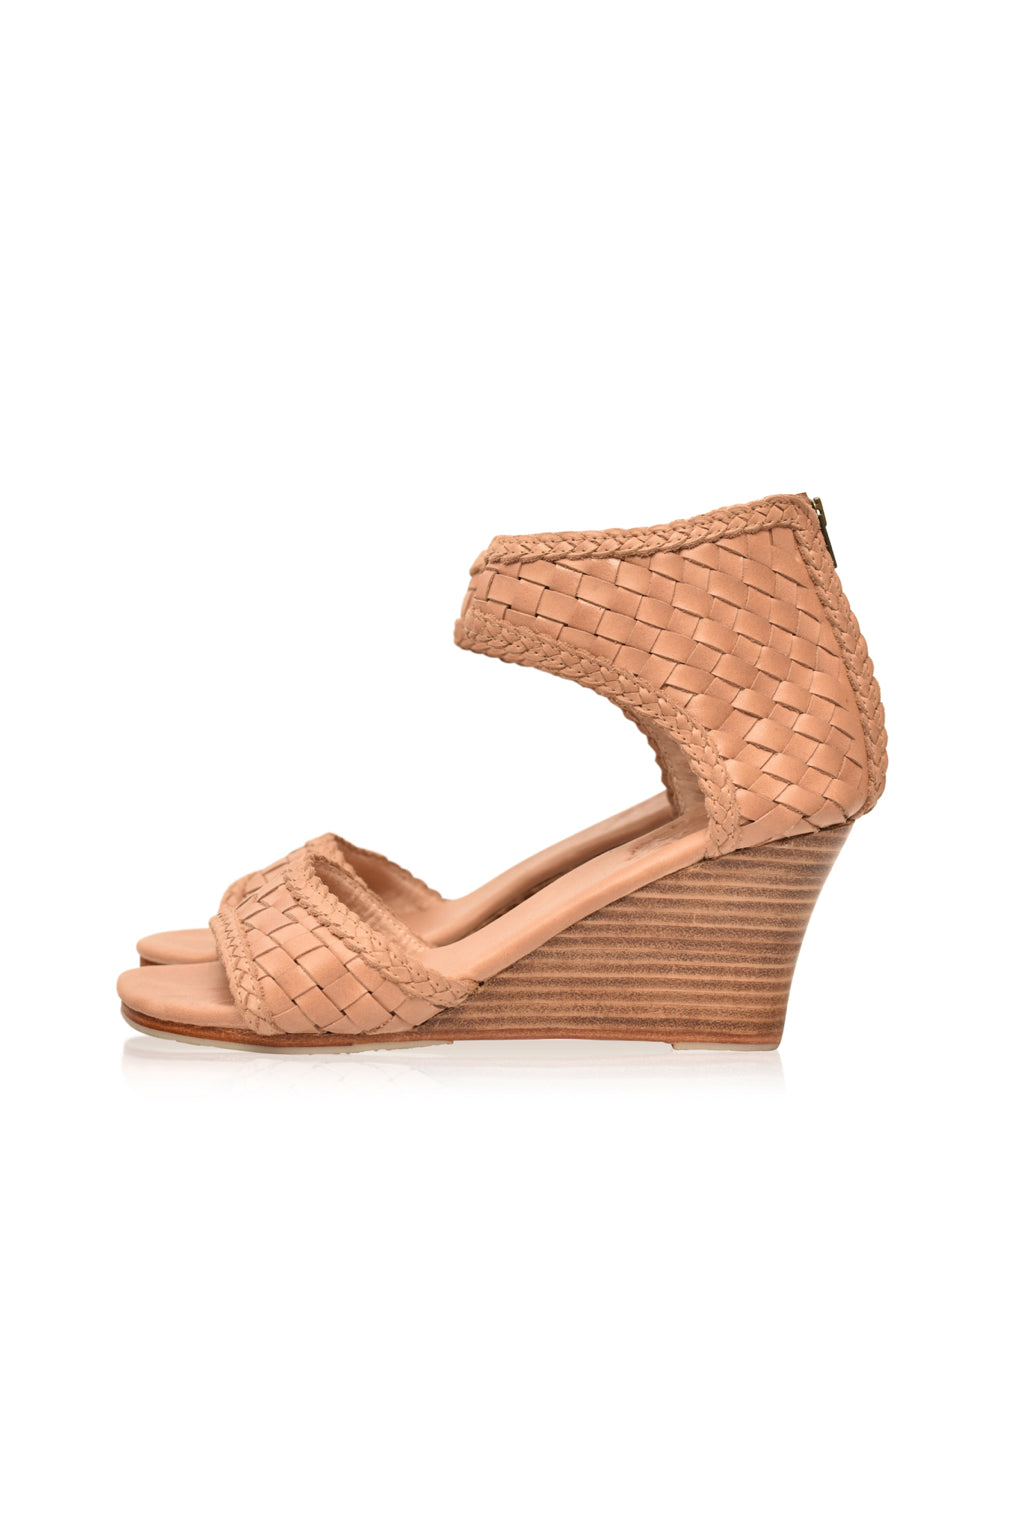 Athena Leather Wedges by ELF